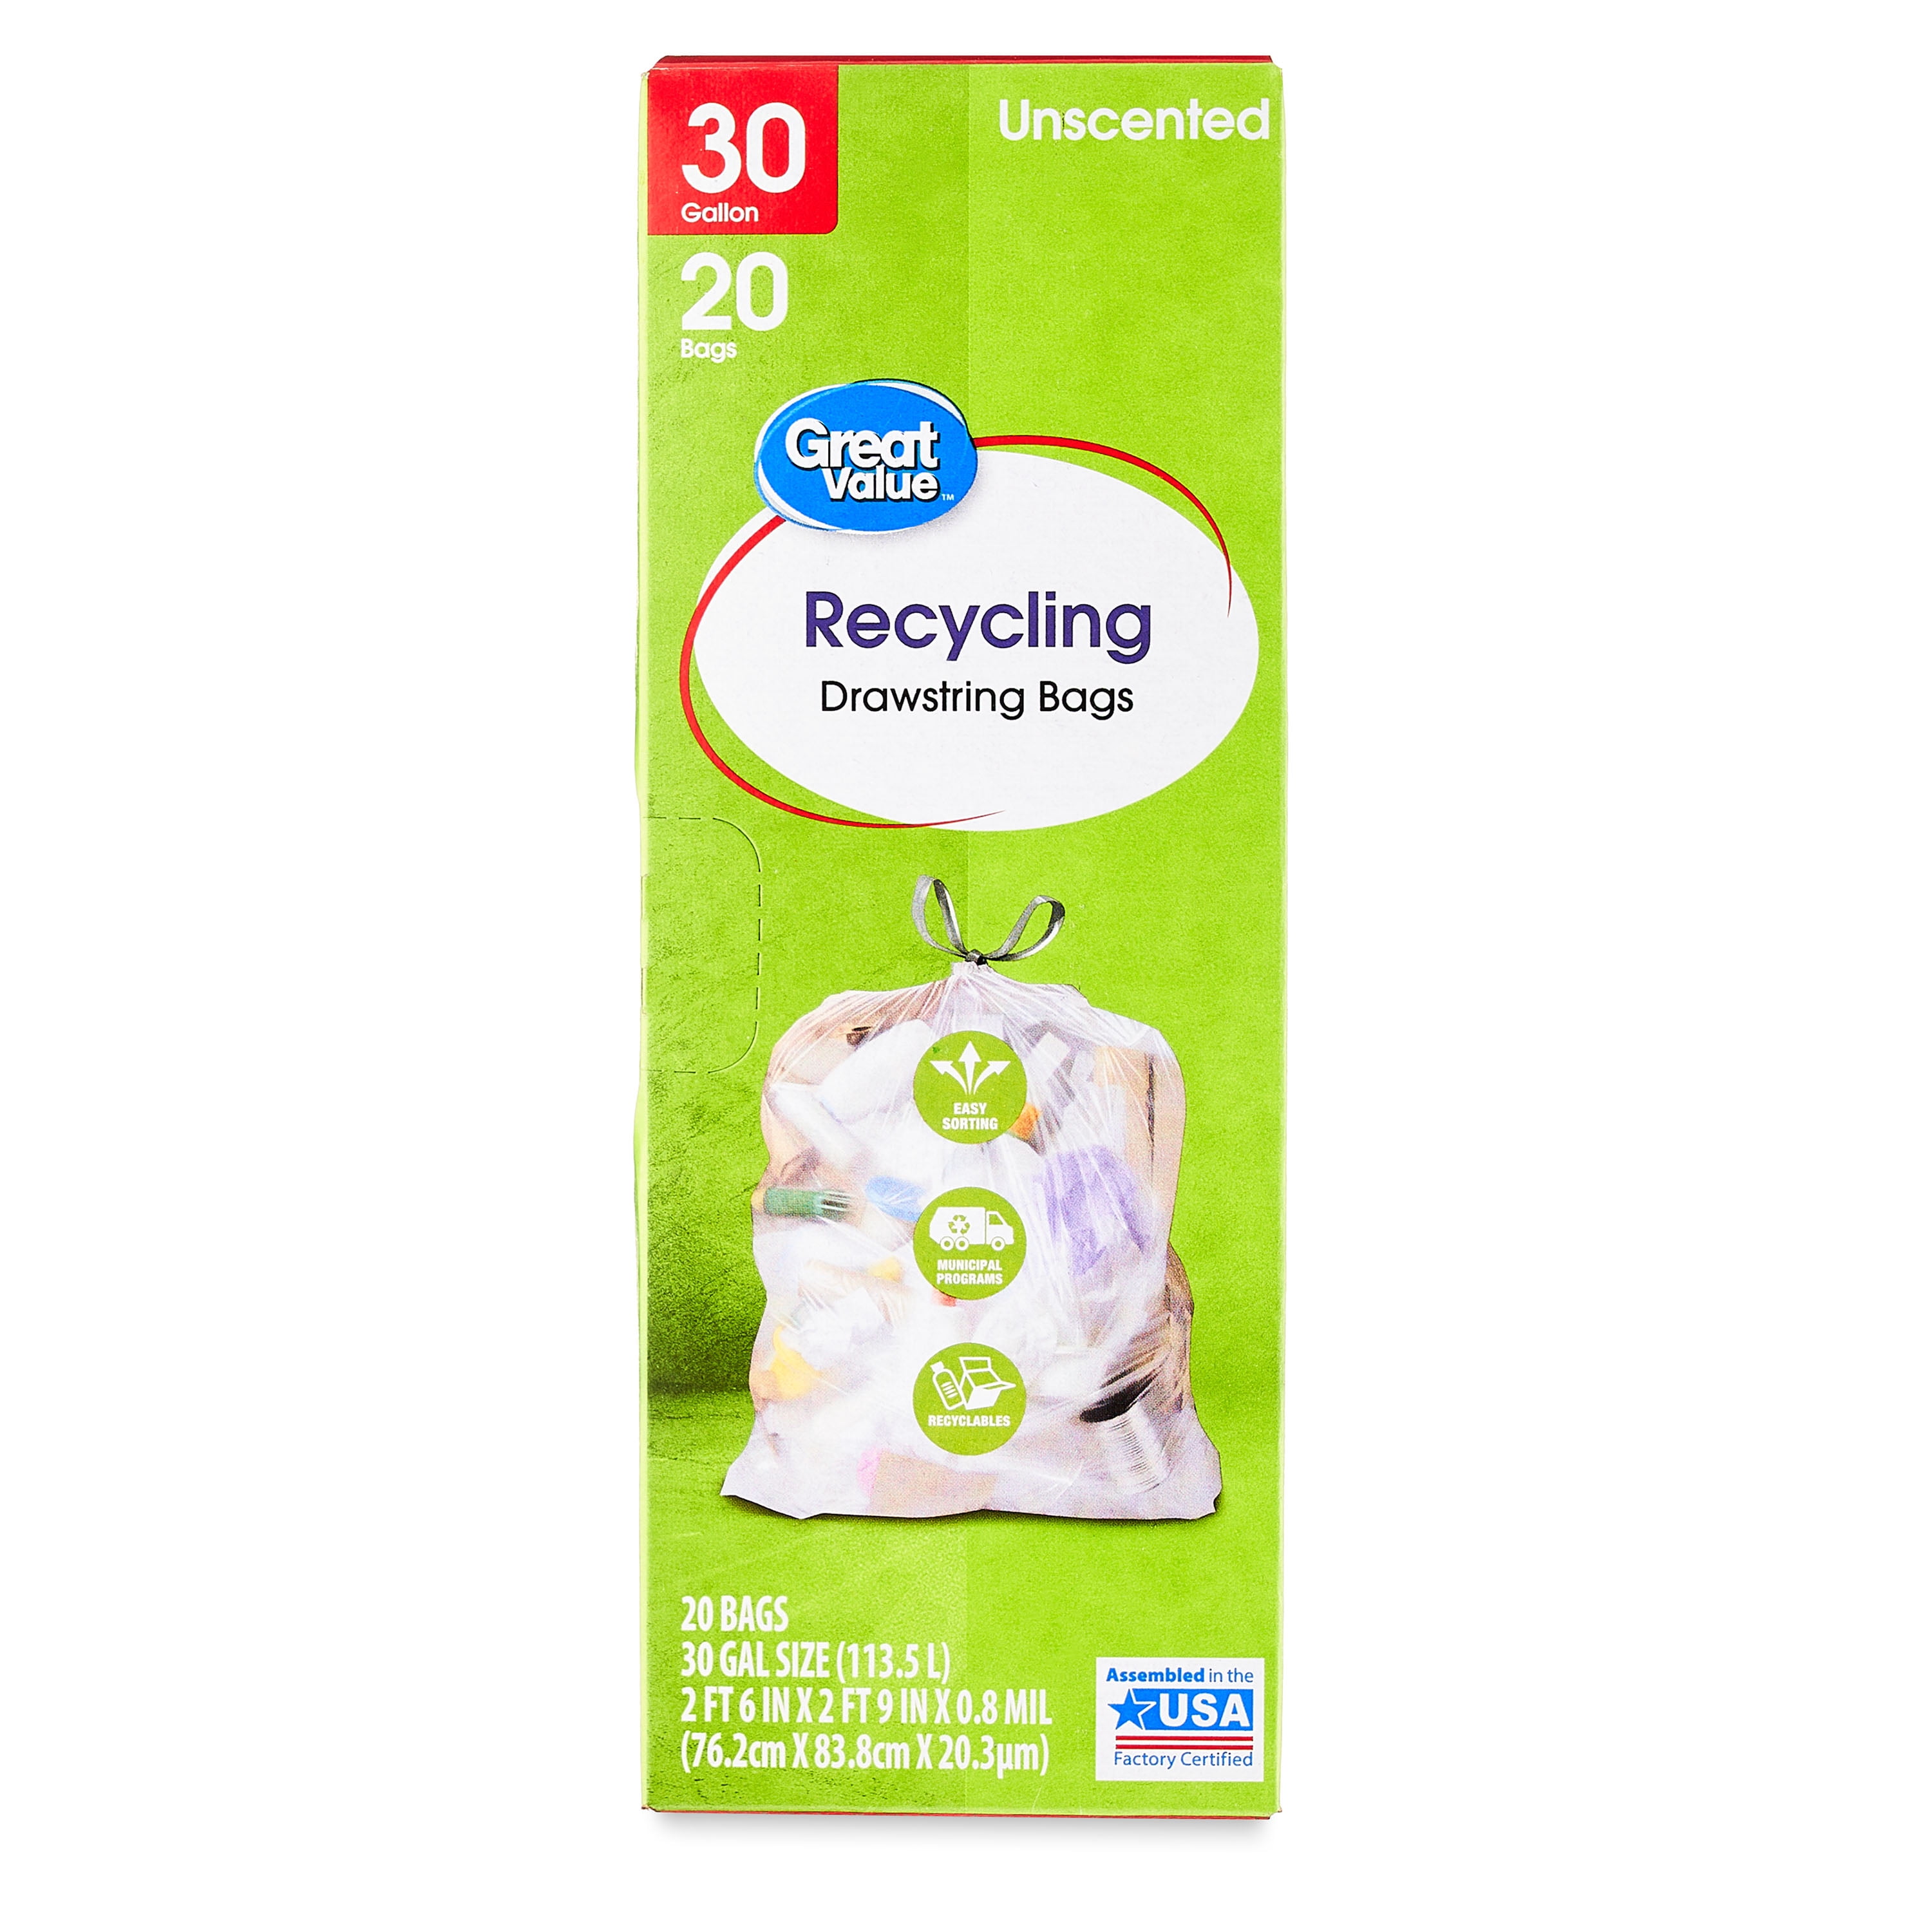 Pillows Toys 24 W x 32 H Recycling Seasonal Clothing Garbage Meat Roasts Extra Large Super Big Size Clear Storage Bags Paintings & Arts 13 Gallon 25 Count Protect & Store Away Bedding 